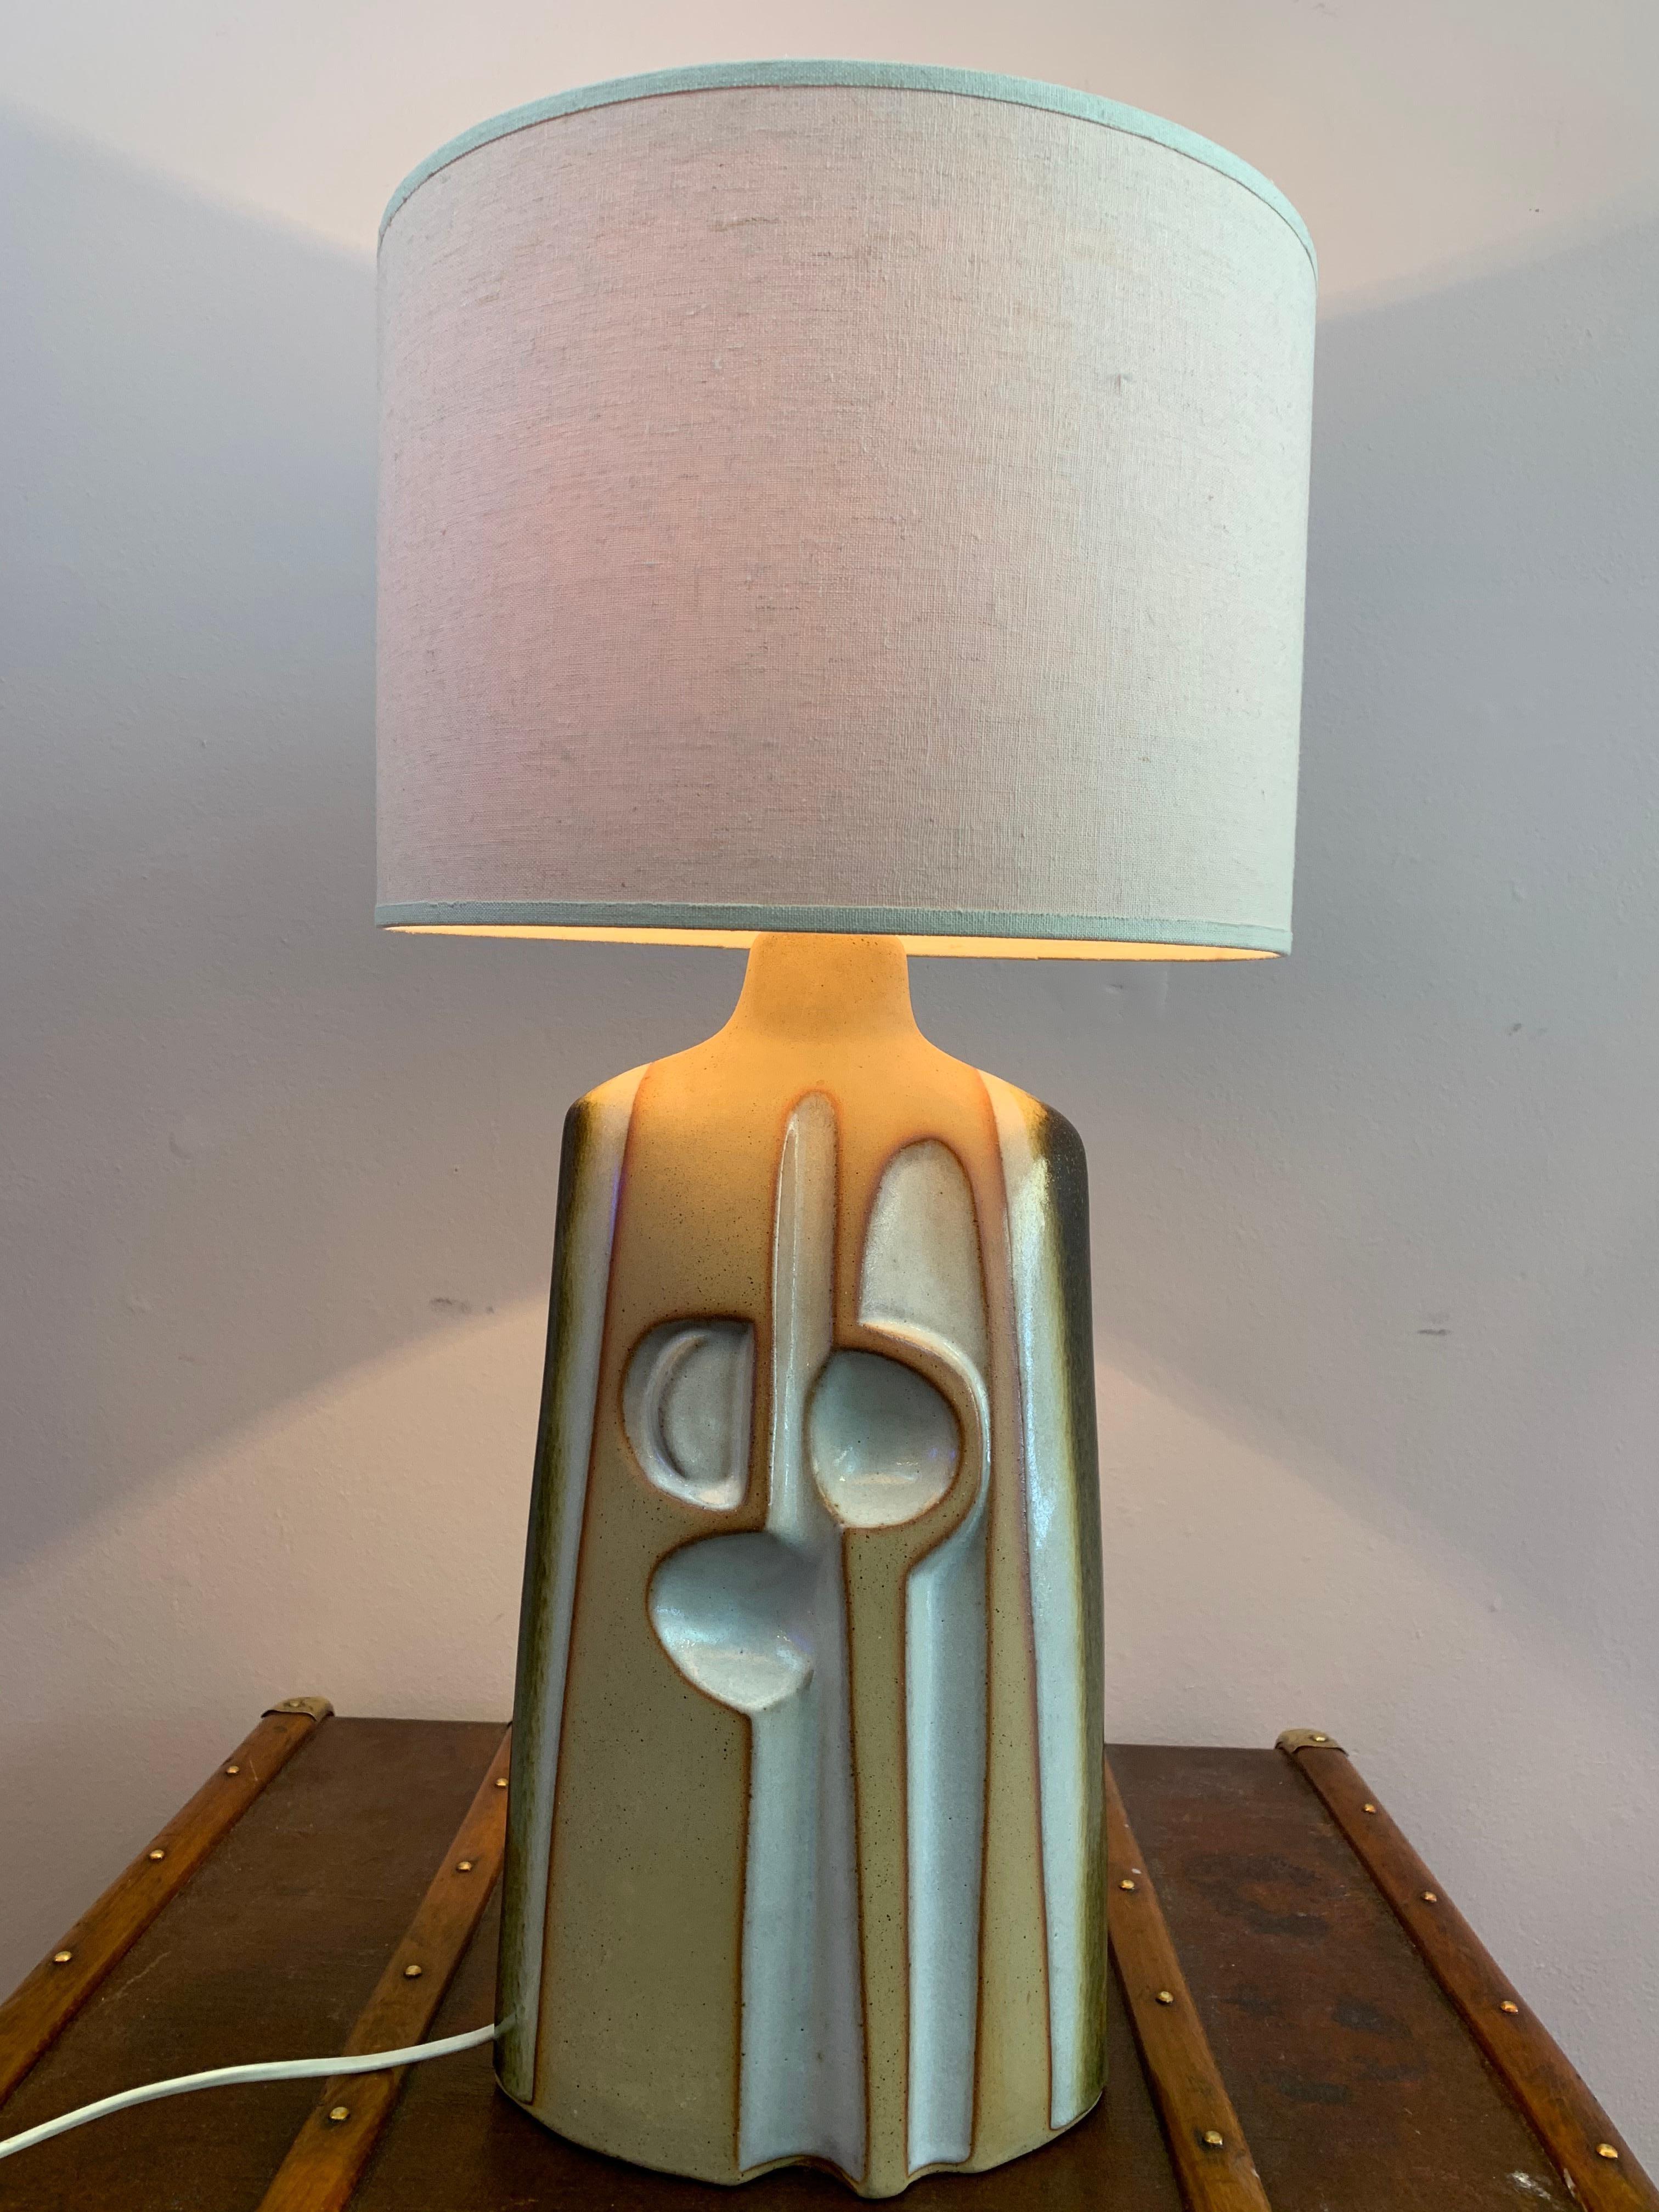 A large Cornish Tremaen Pottery sculptural table lamp inc. a new shade from their Zennor range.  Produced between 1978 to 1980. Designed by Peter Ellery. The lamp has an abstract, sculptural design down the length of the central section in muted